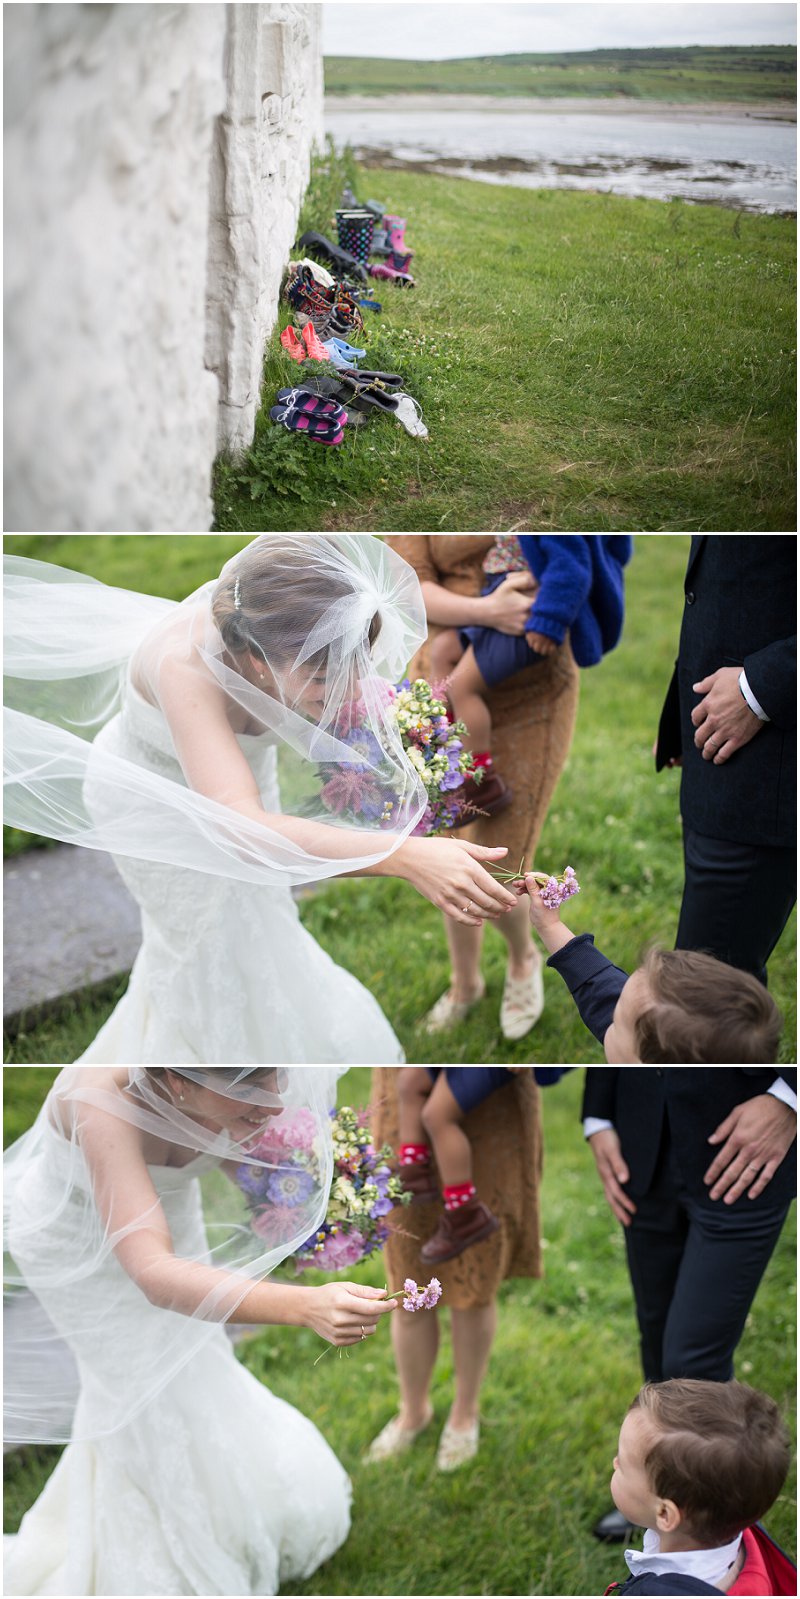 Shoes outside the Church and Boy Gives Bride Flowers at Anglesey Wedding